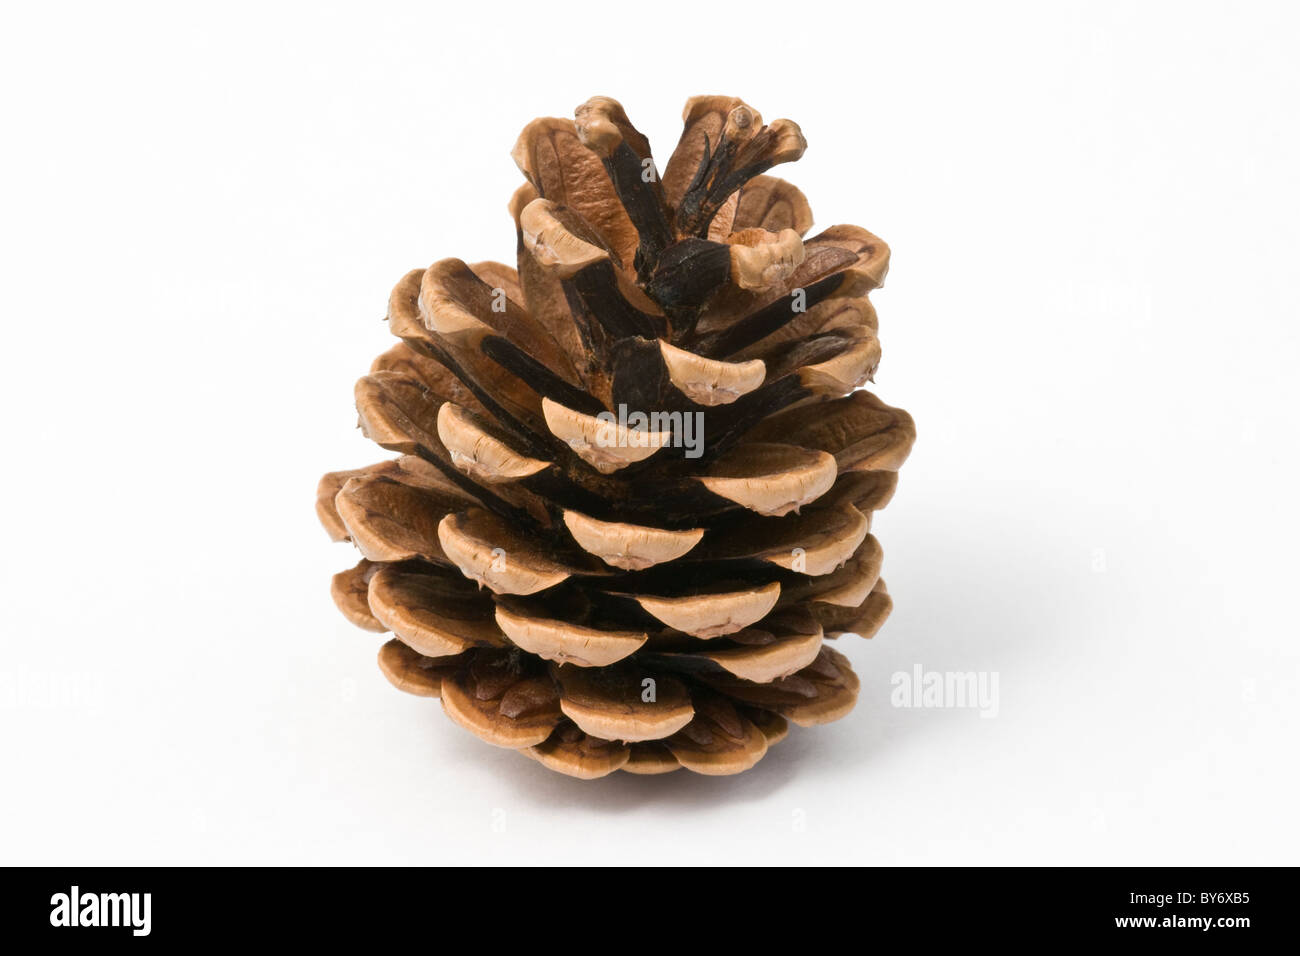 Pine cone on a white background. The cones are from a Scots Pine tree. Stock Photo